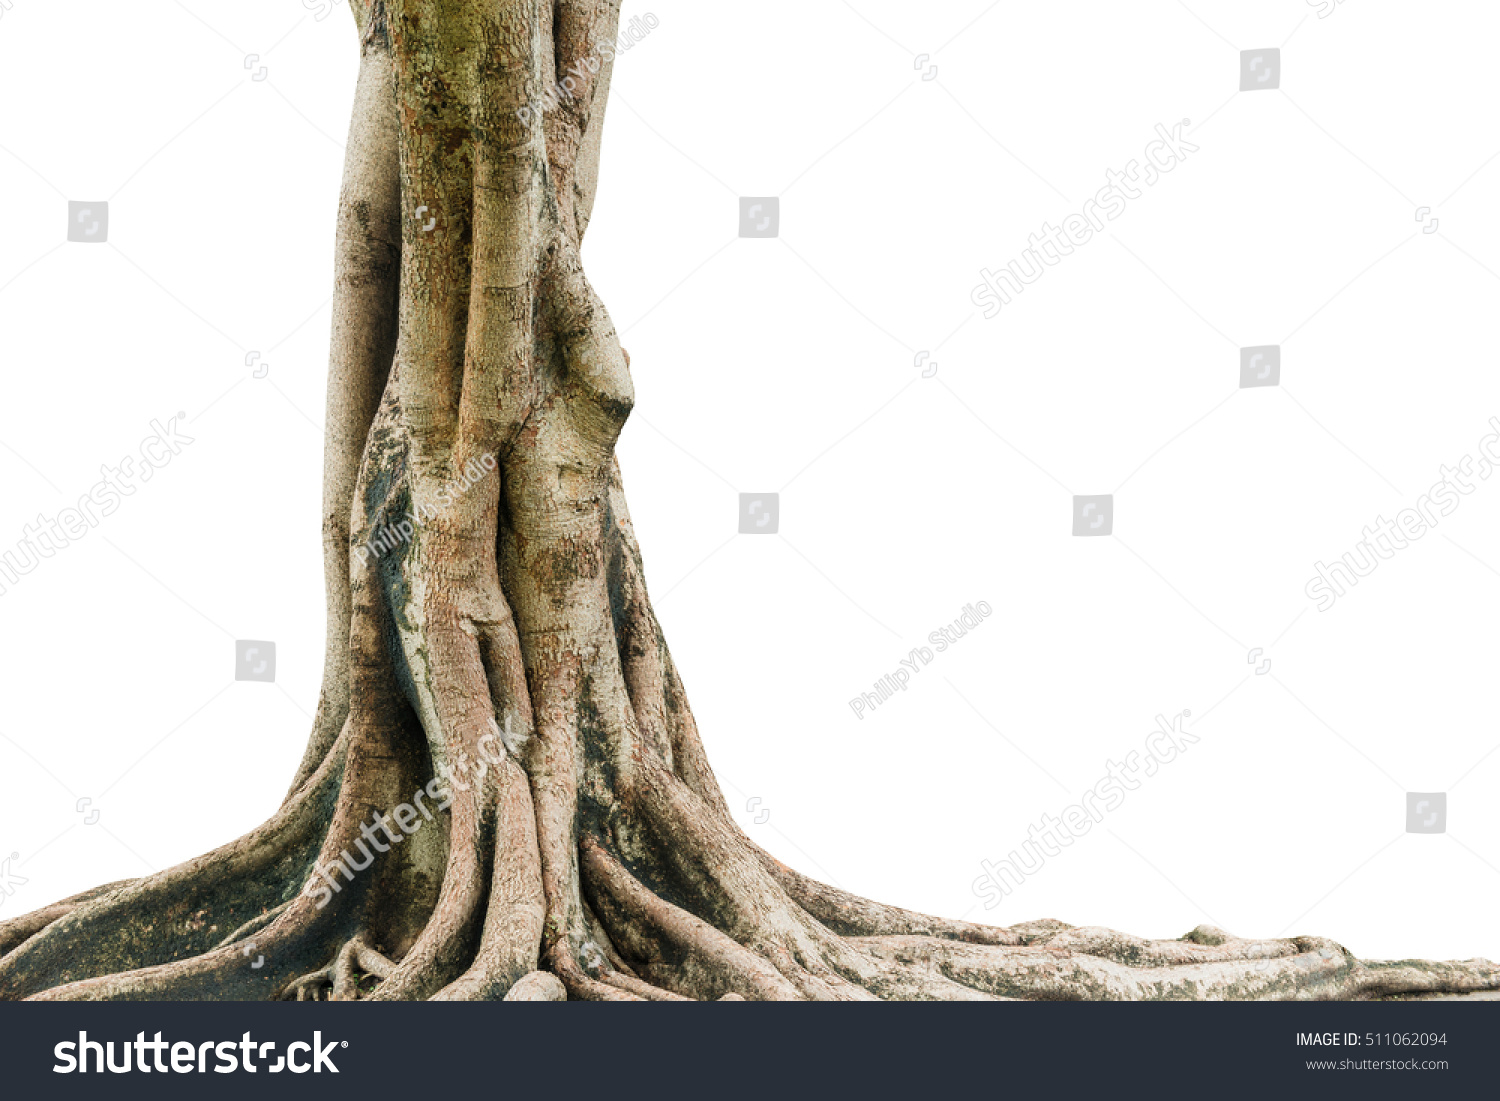 Roots of a tree isolated on white background. This has clipping path. #511062094